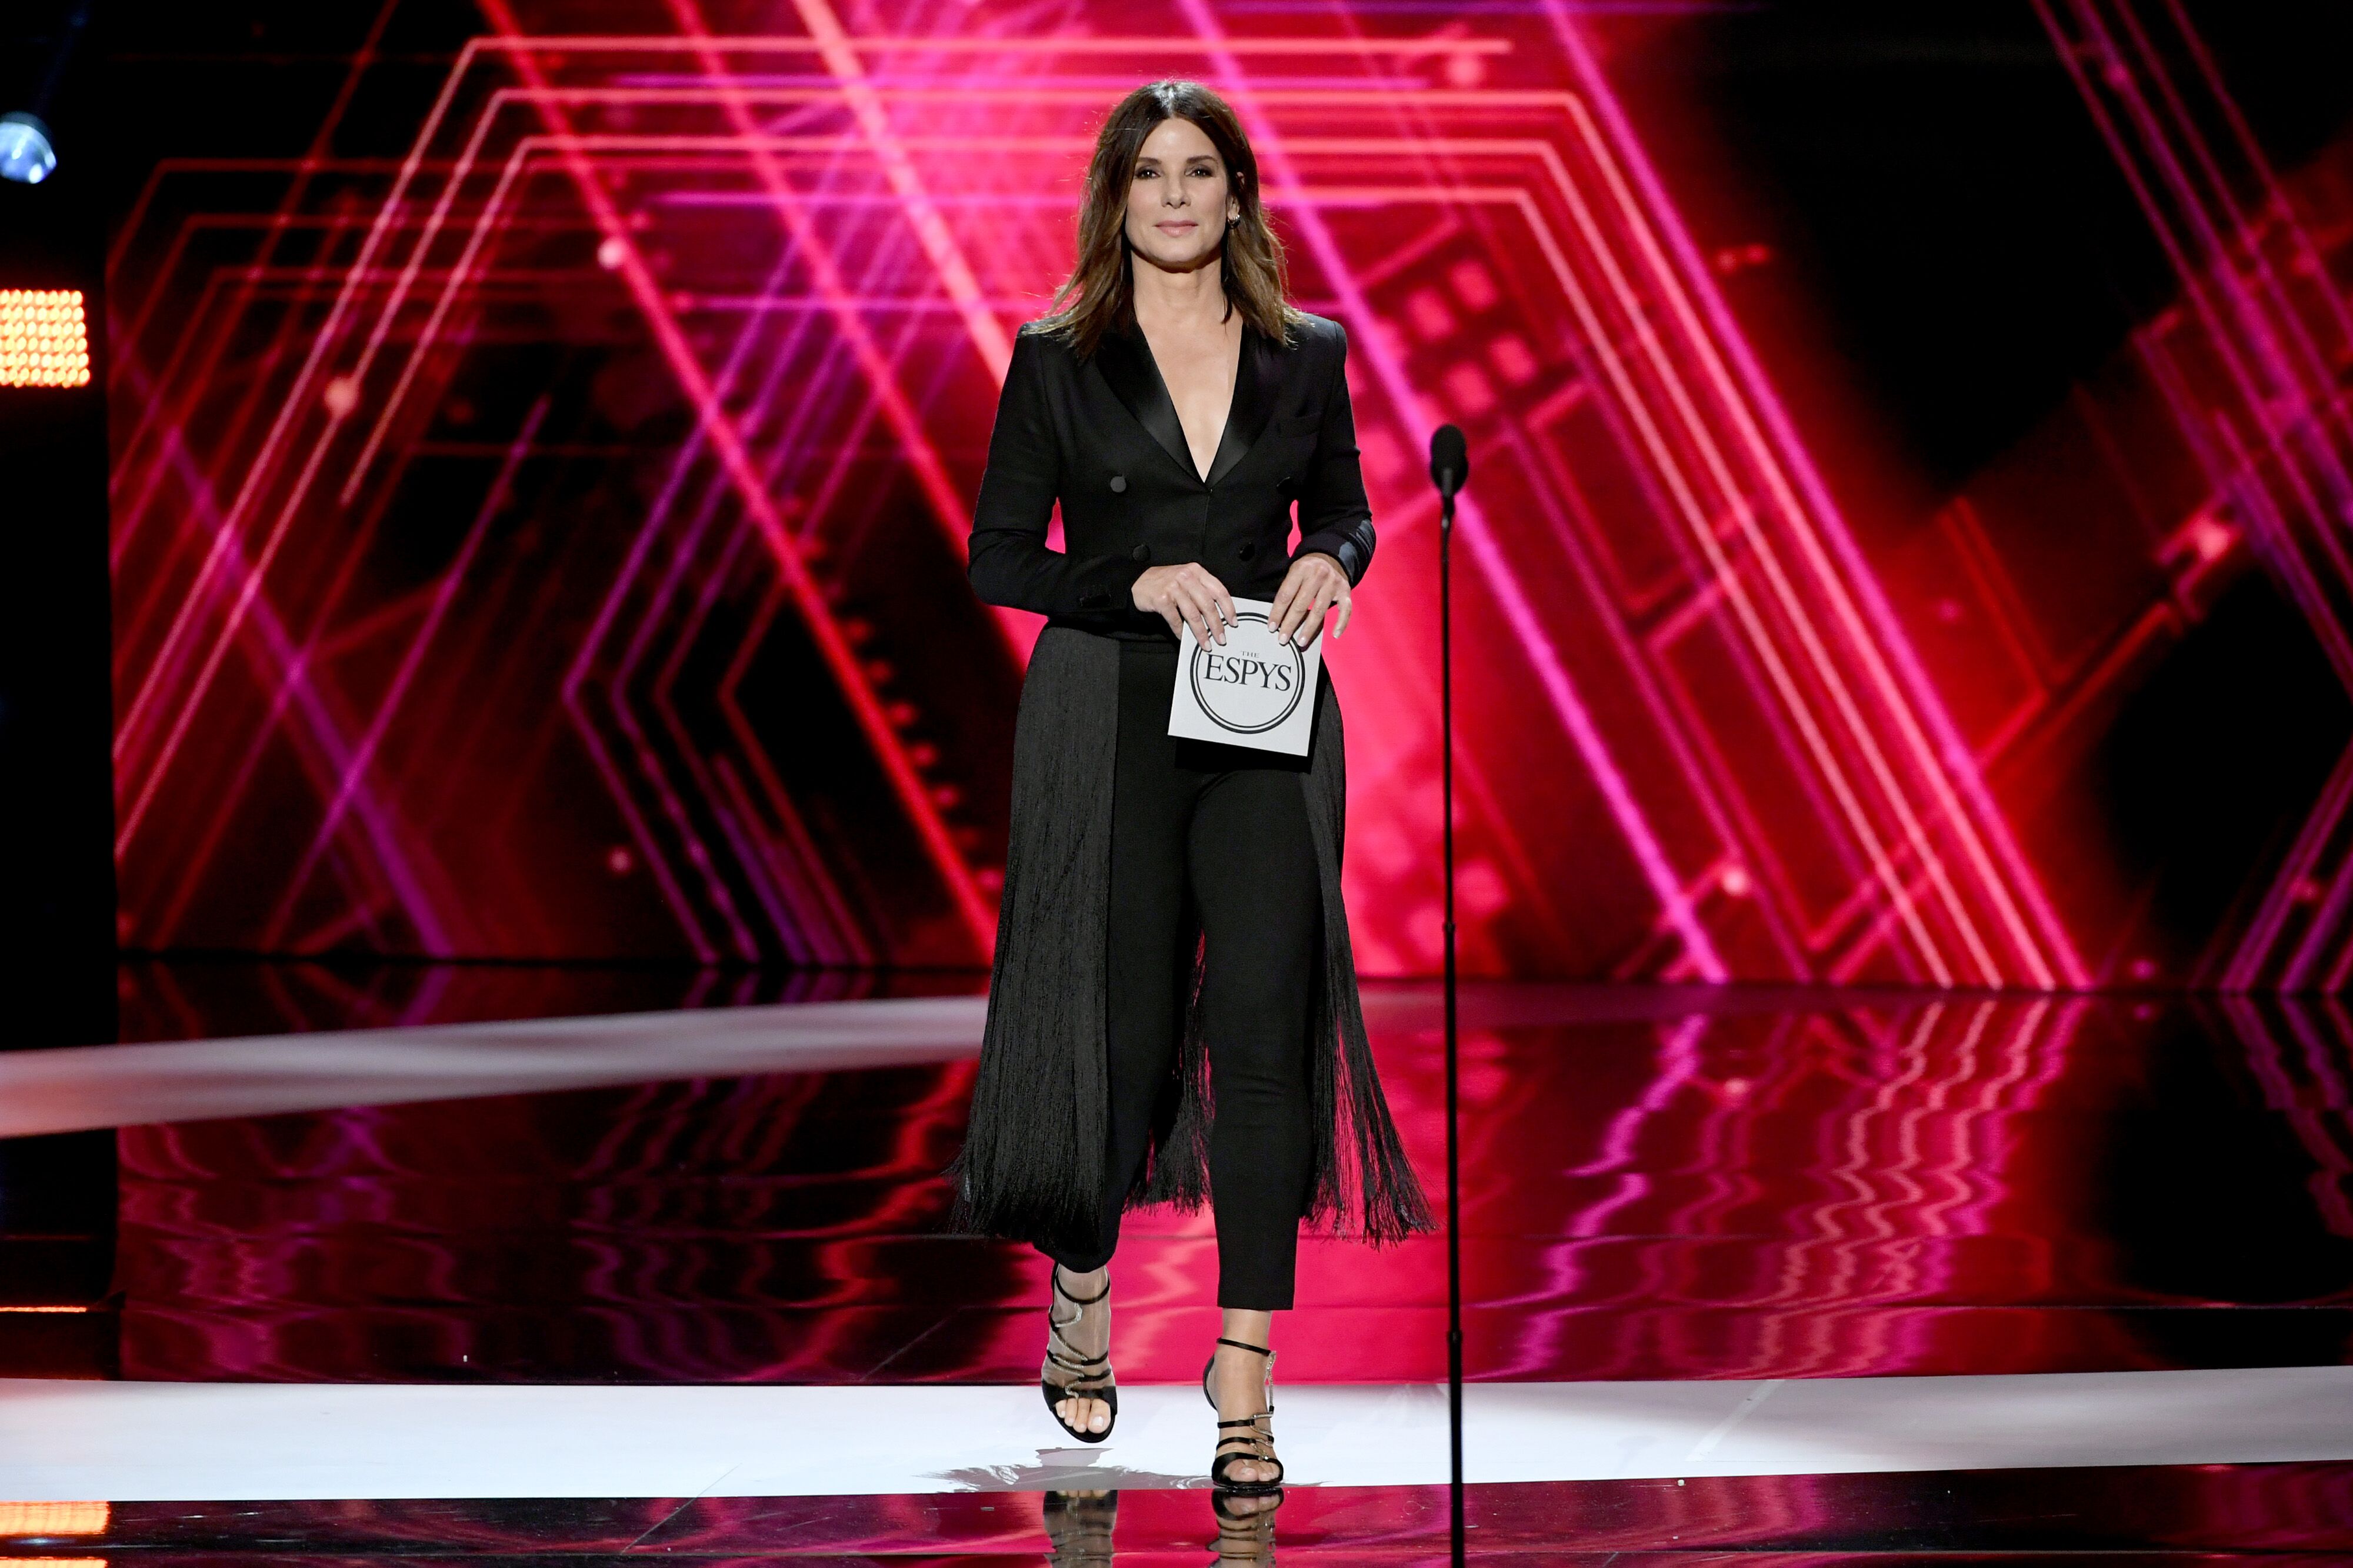 Sandra Bullock at the ESPY Awards. | Source: Getty Images